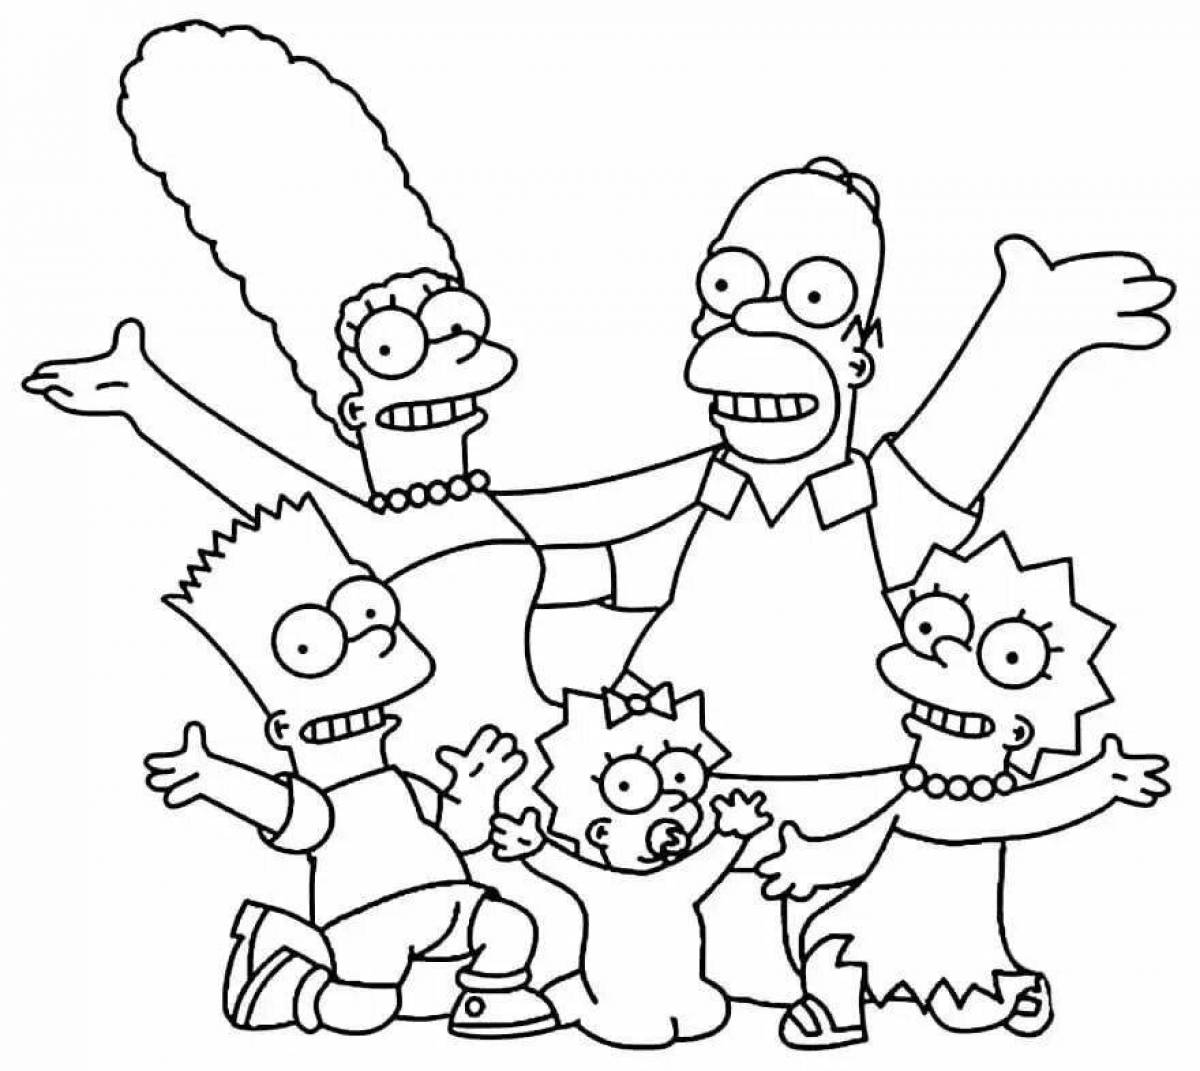 Coloring page charming marge simpson